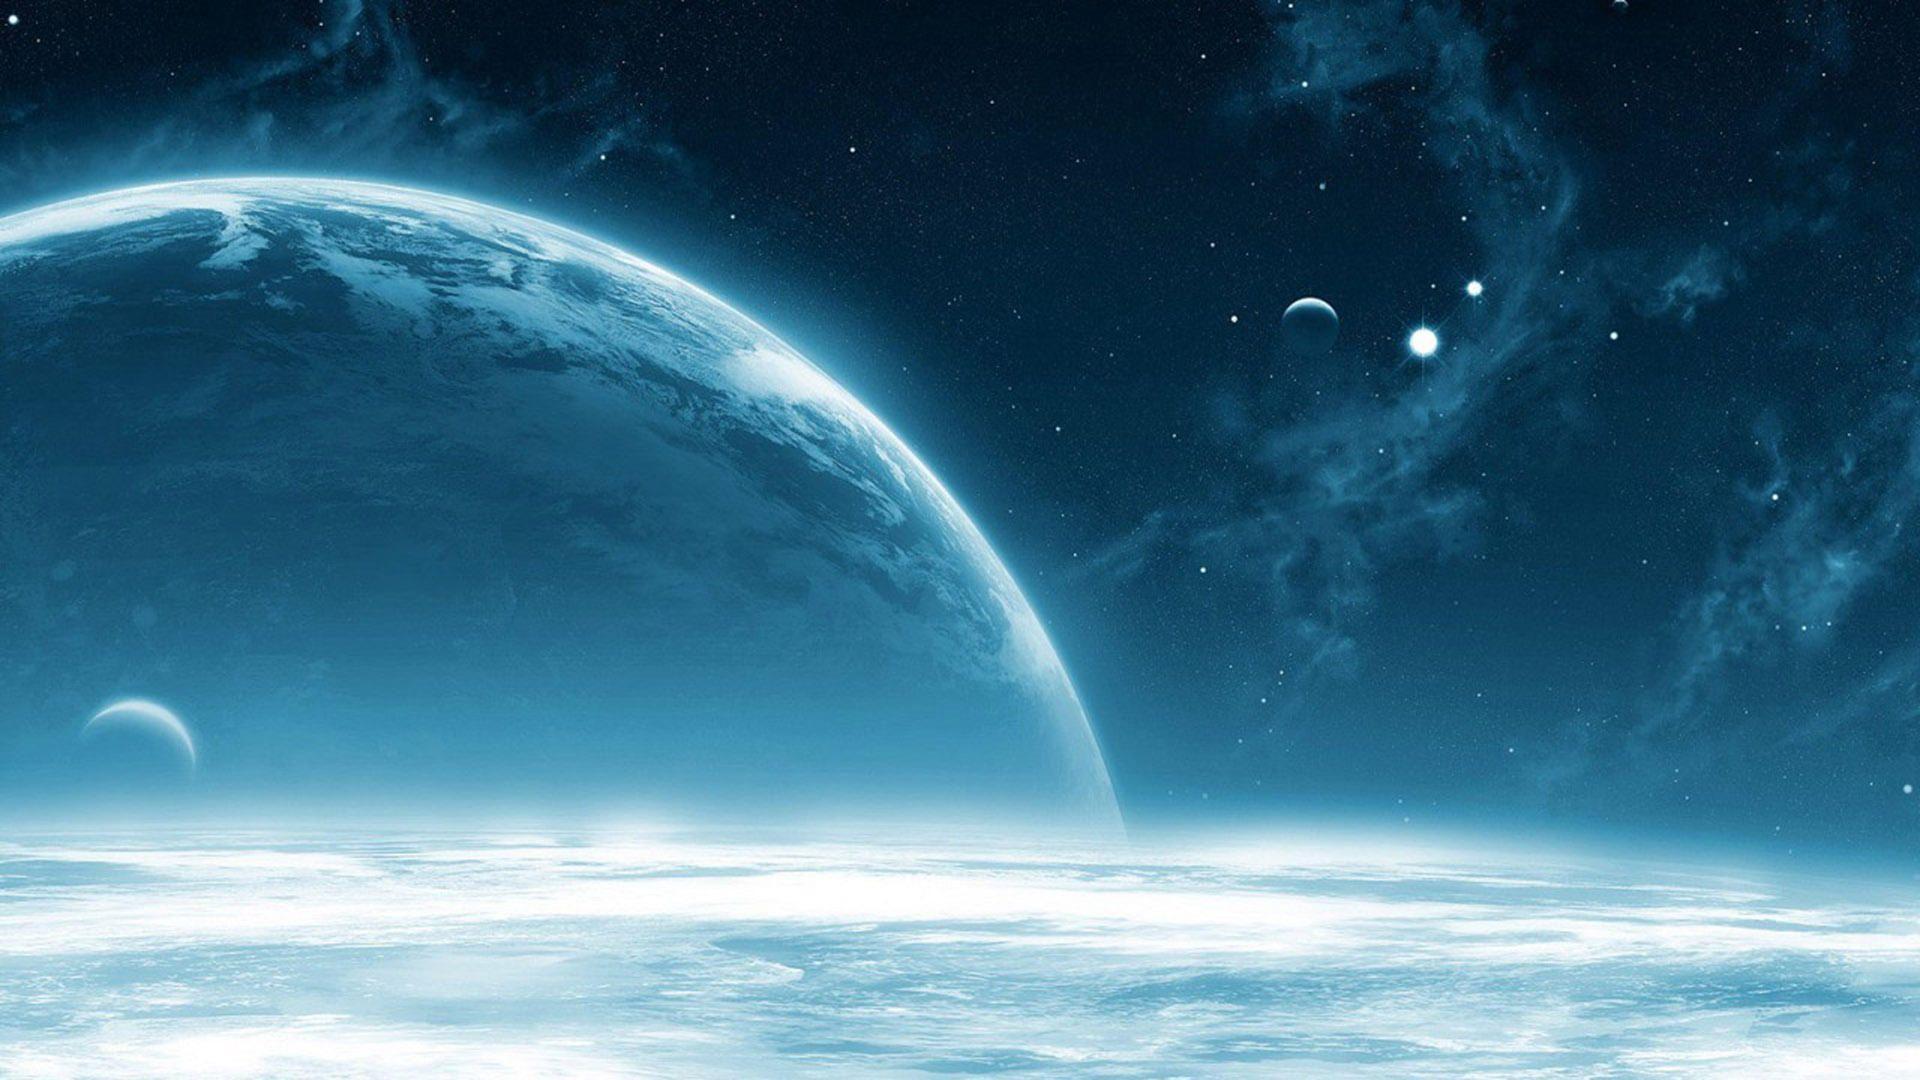 Hd Wallpaper Space Universe Image 6 HD Wallpaper. Hdimges